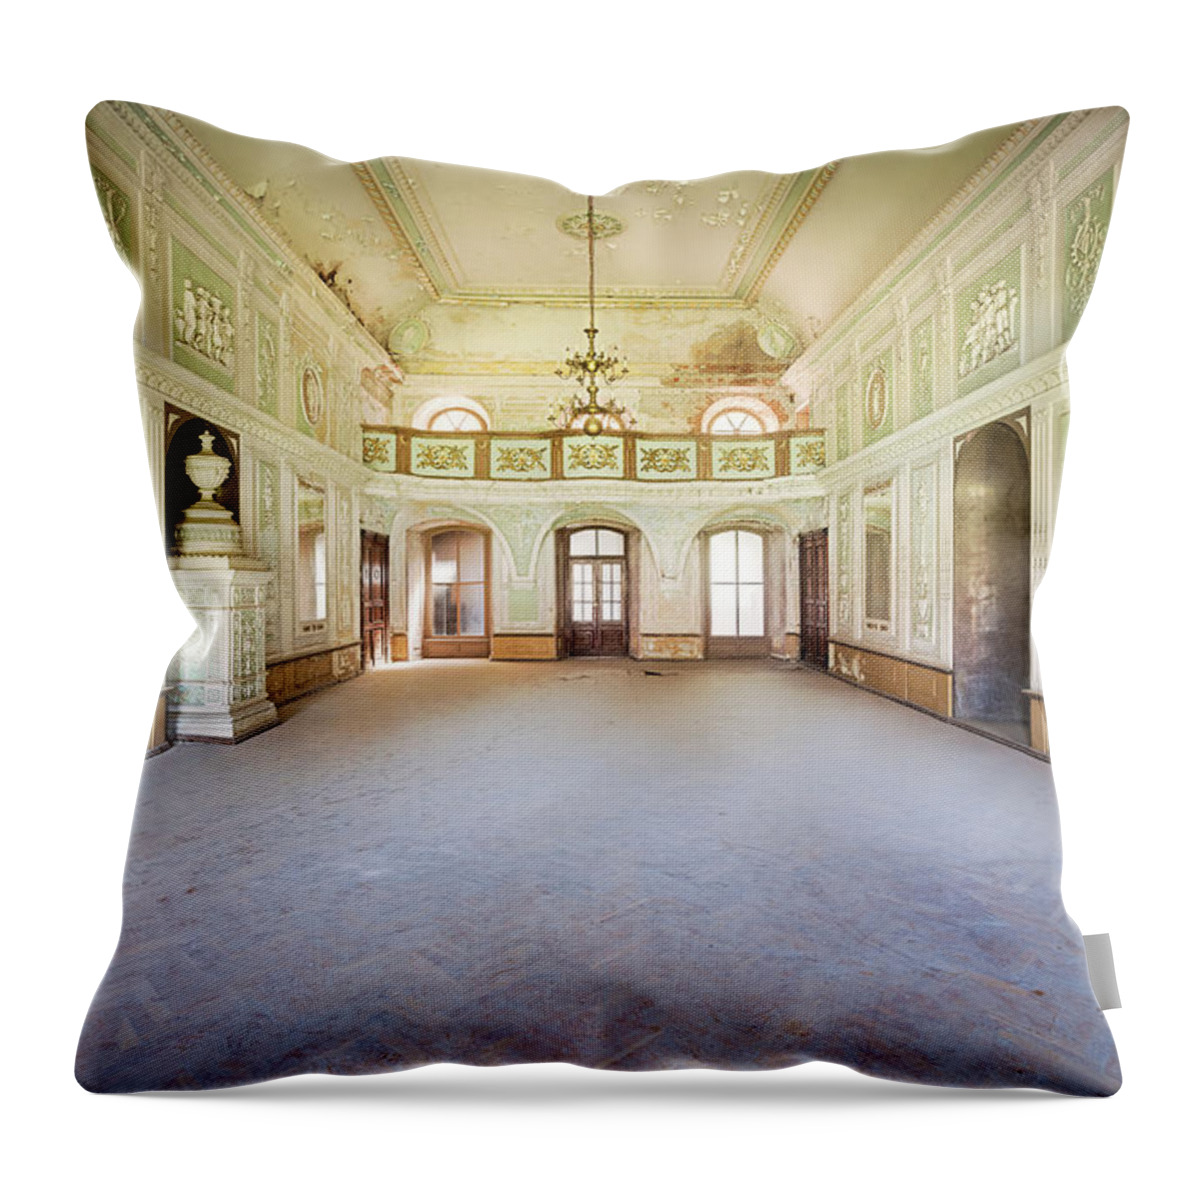 Abandoned Throw Pillow featuring the photograph Abandoned Green Ballroom by Roman Robroek